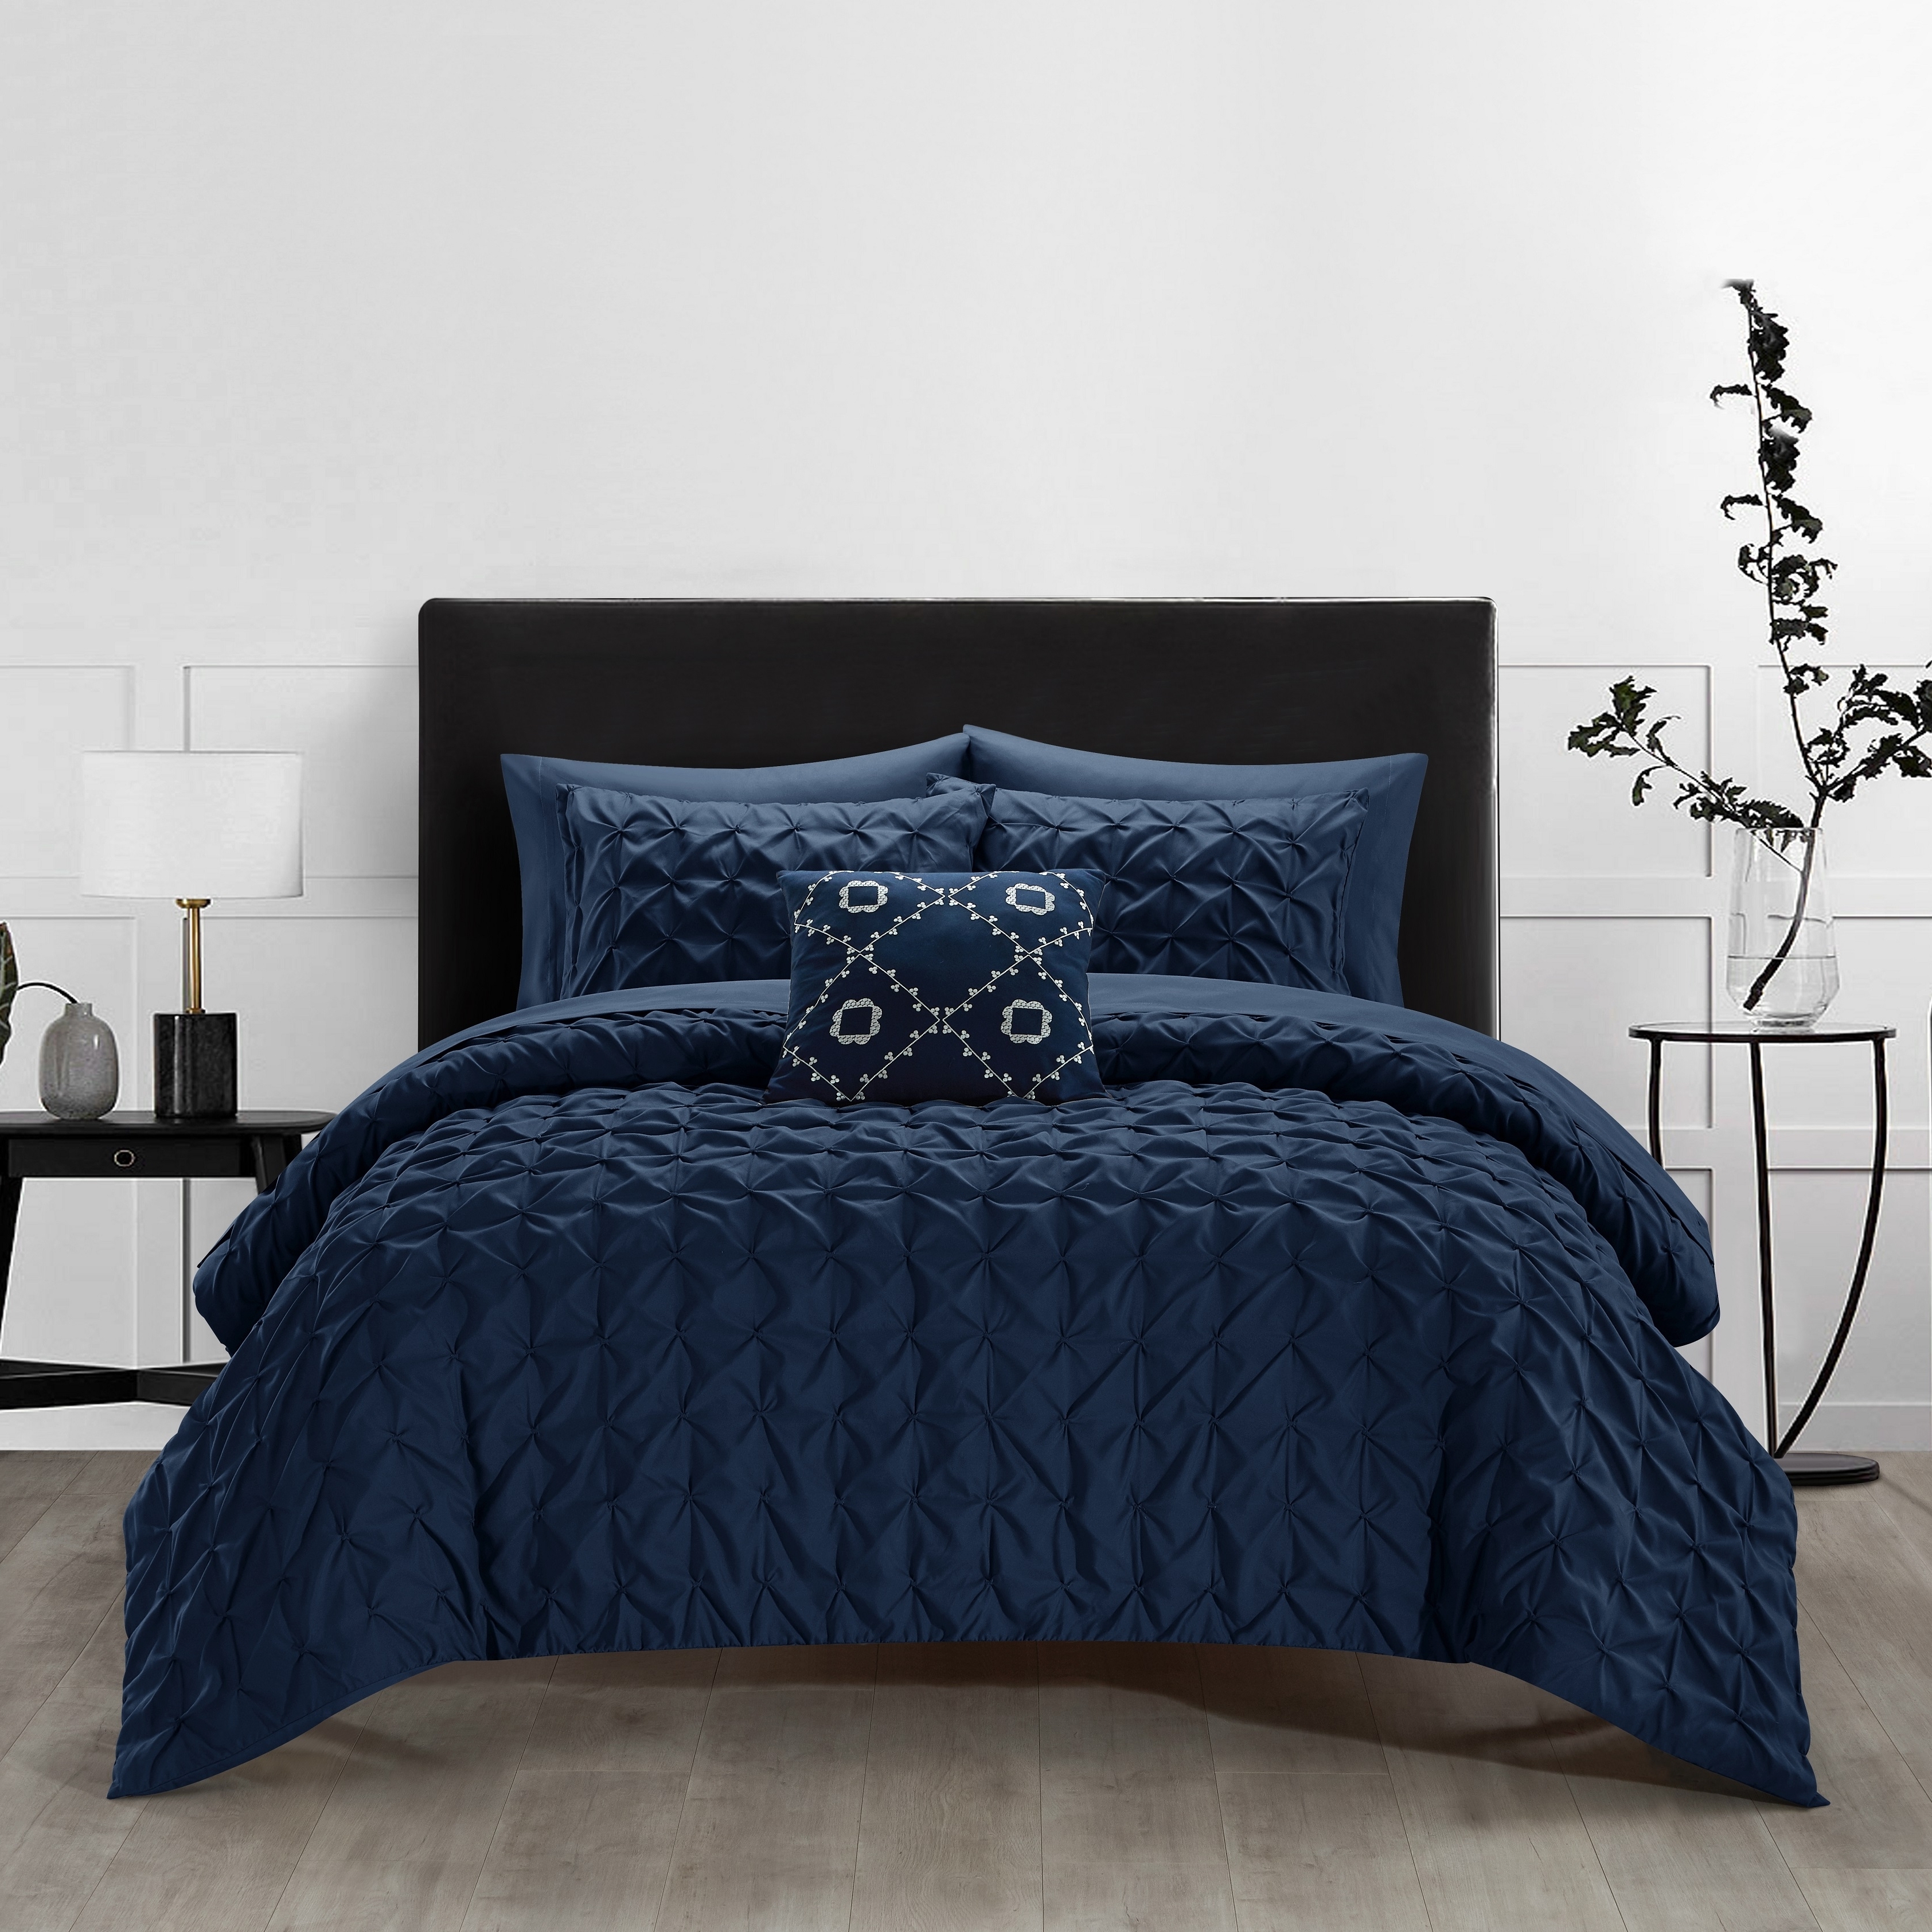 Edison 8 Or 6 Piece Comforter Set Pinch Pleat Box Design Bed In A Bag Bedding - Navy, Twin - 6 Piece